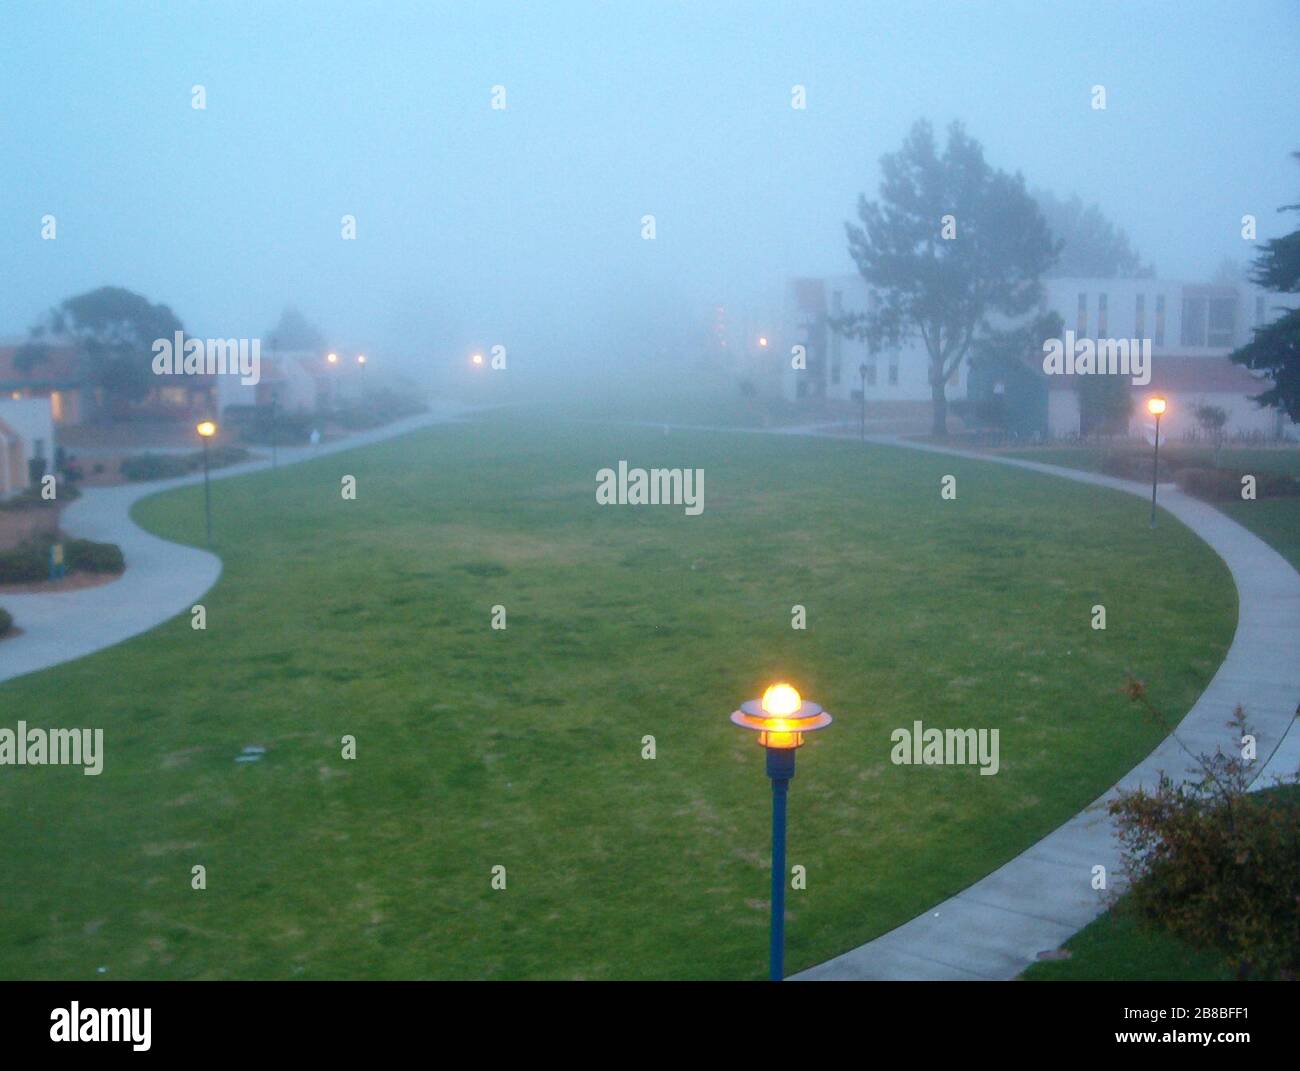 'English: I am the author of this photo. I took it during the fall of 2004 from the third floor of building 210 at CSUMB. It well represents the extreme fog that can often cover the entire campus. I feel it is fair to show to the public because no persons are displayed and the area (the CSUMB campus) is already considered public.; 25 June 2007 (original upload date); Transferred from en.wikipedia to Commons by Premeditated Chaos using CommonsHelper.; DirectorG at English Wikipedia; ' Stock Photo